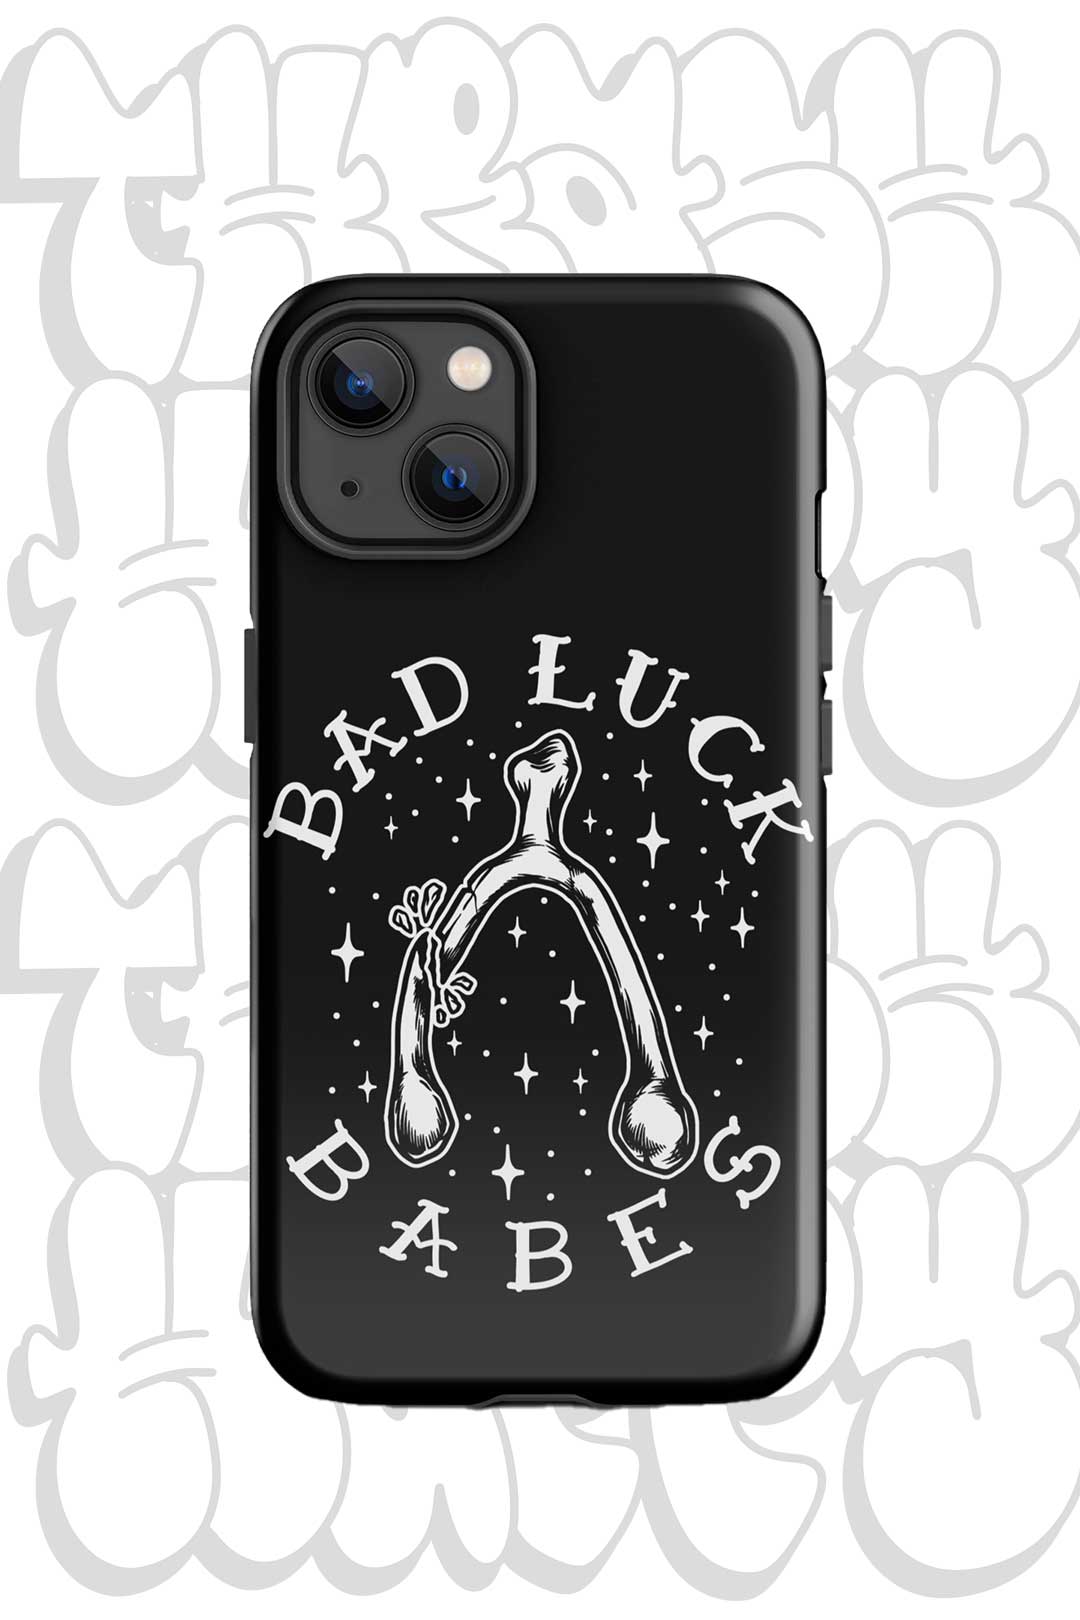 Bad Luck Babes Phone Case